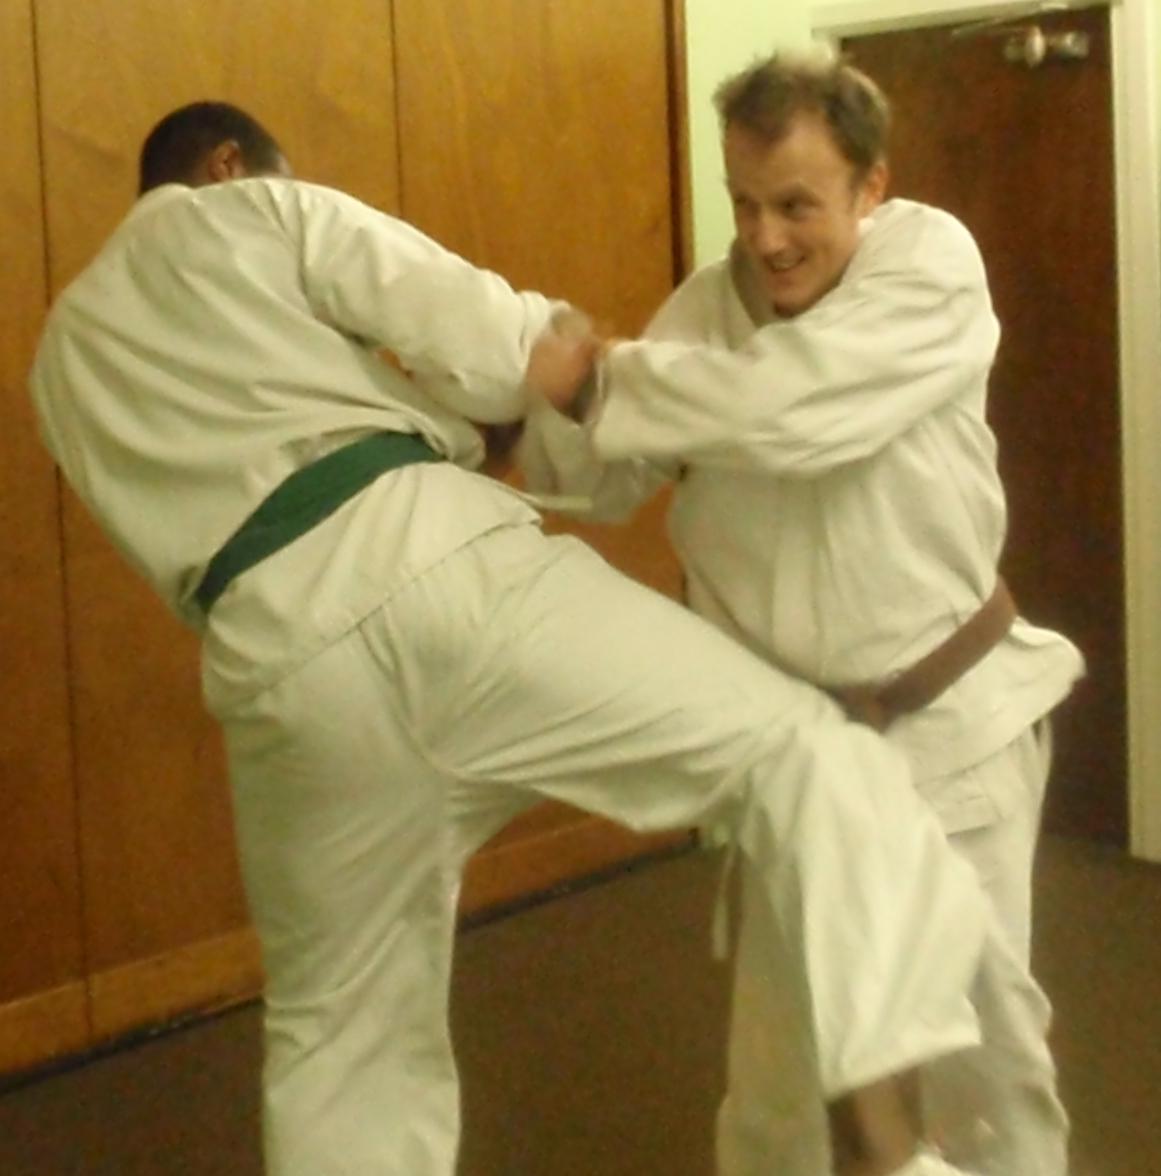 A round kick impacting with the knee